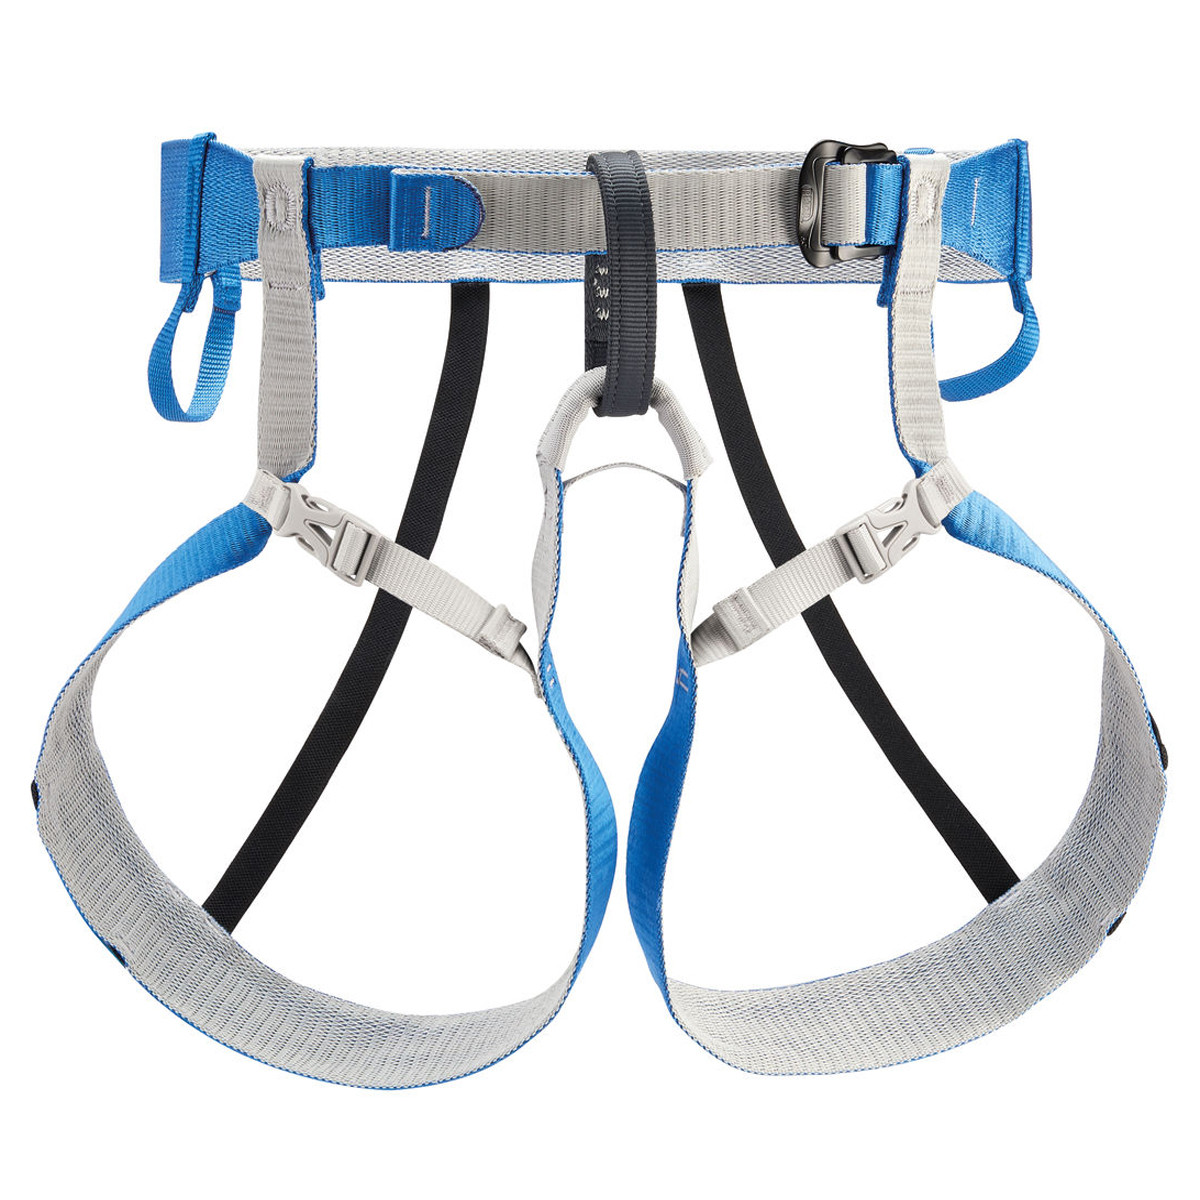 PETZL Tour Harness Durable, lightweight harness for glacier travel and ski touring, dons with feet on the ground